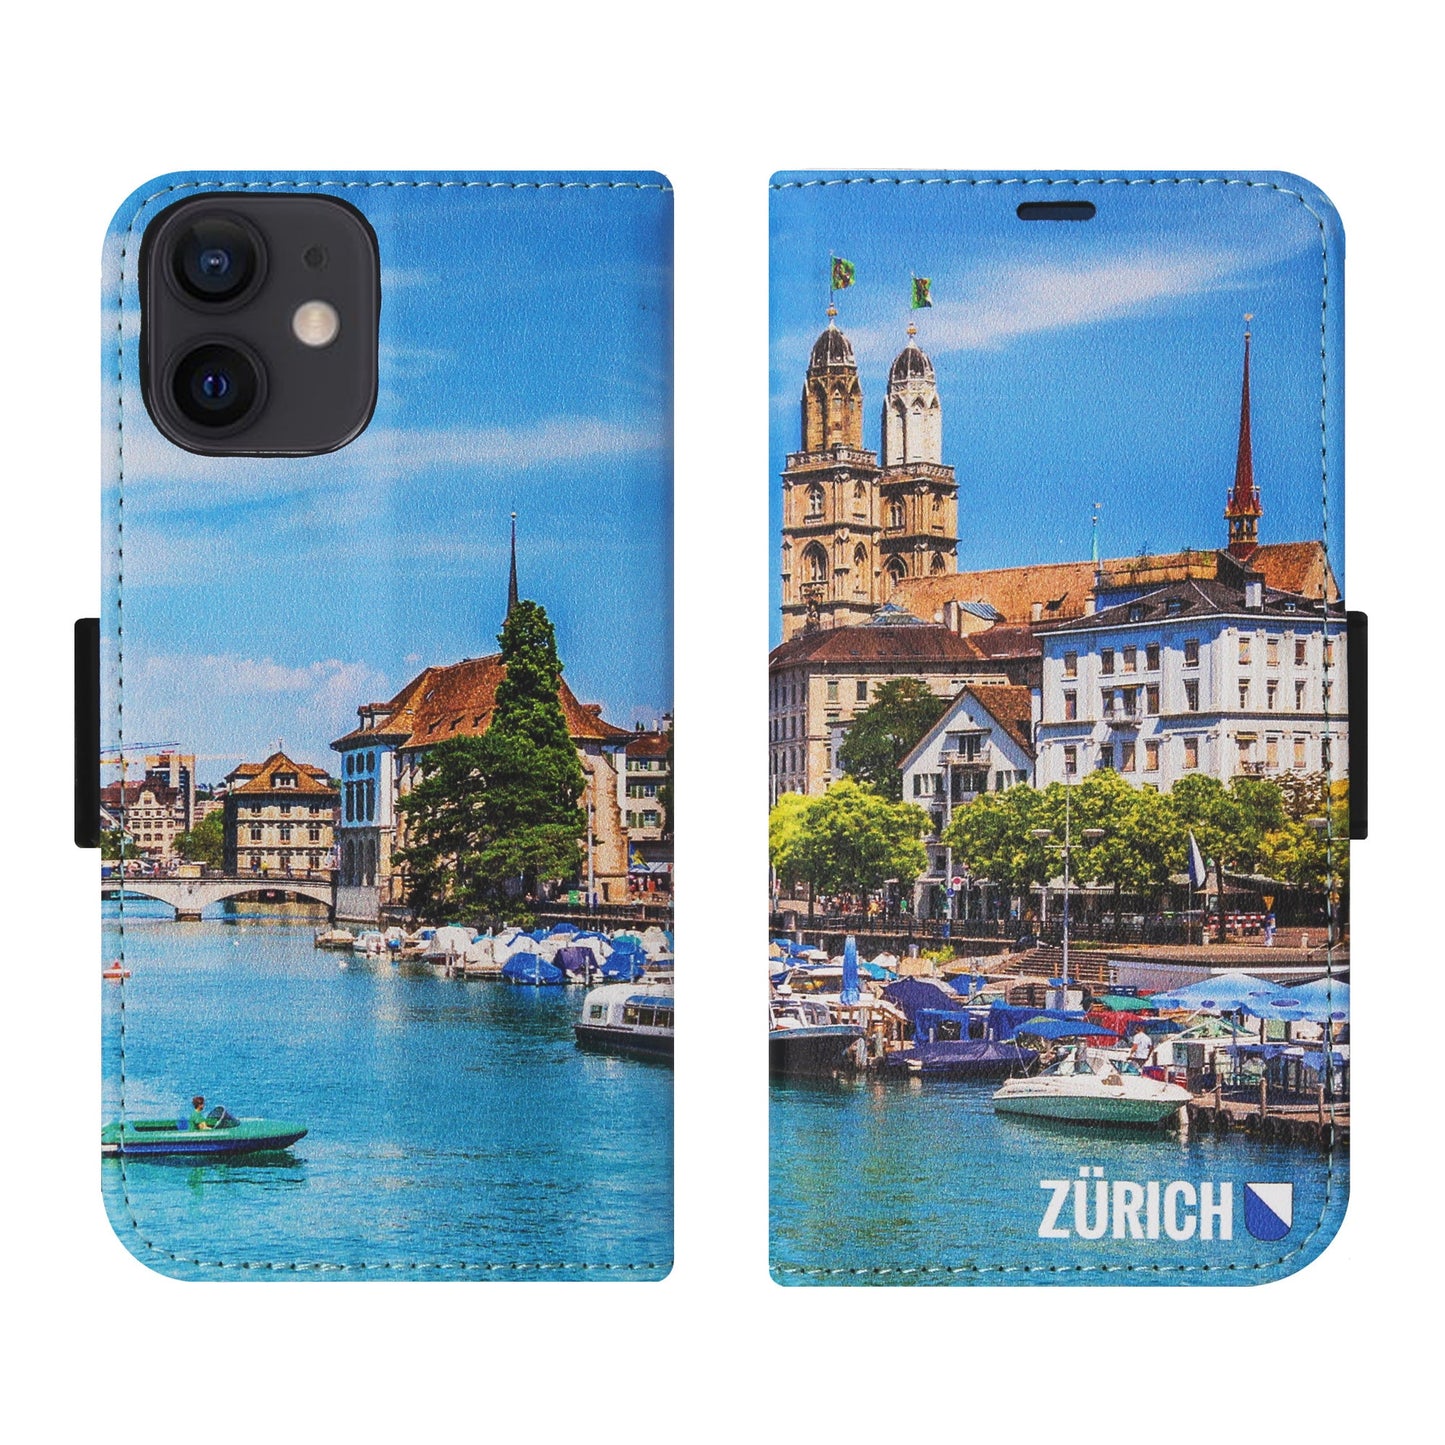 Zurich City Limmat Victor Case for iPhone 12 Mini